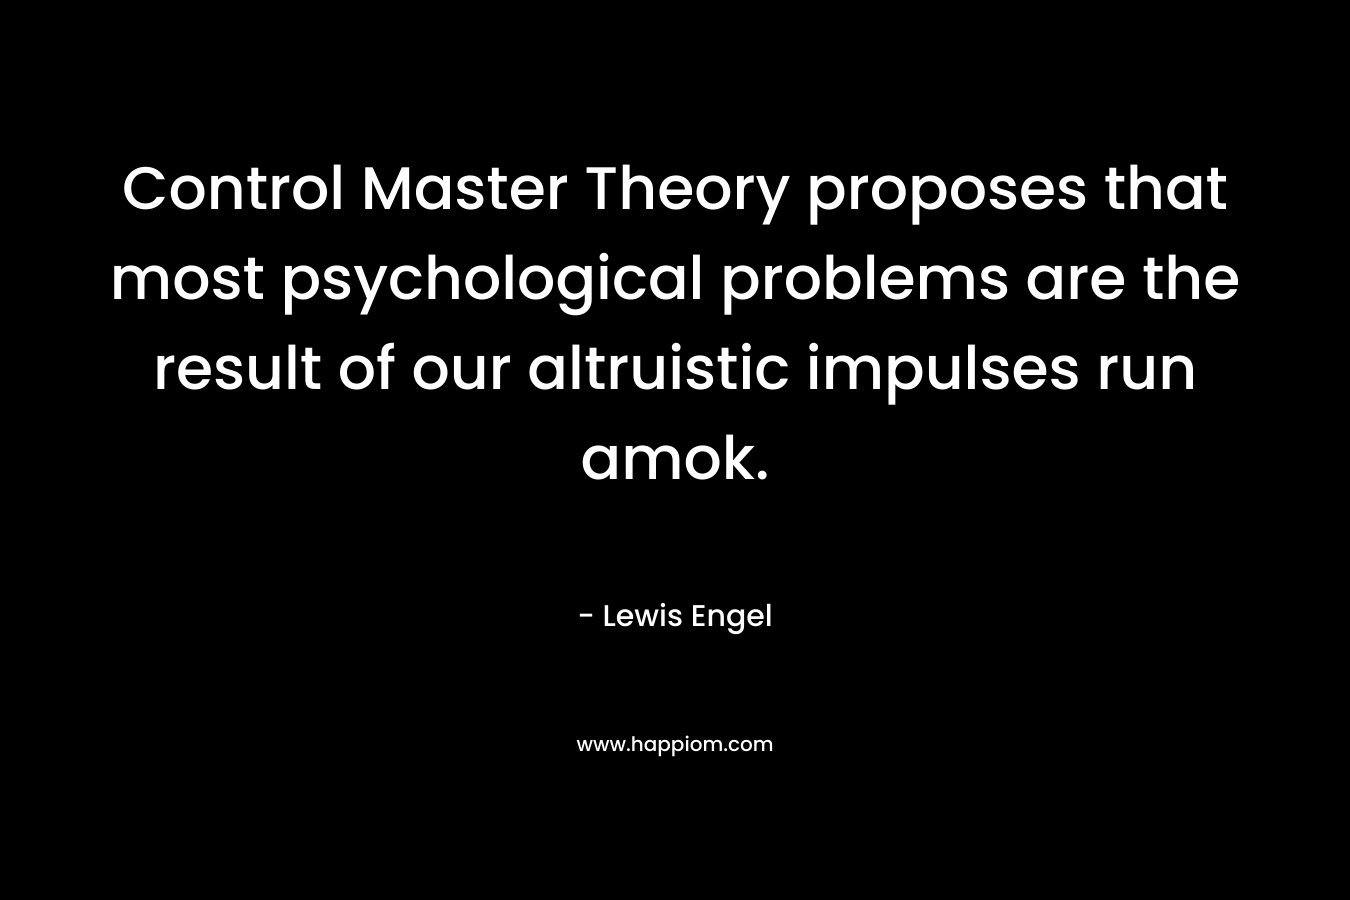 Control Master Theory proposes that most psychological problems are the result of our altruistic impulses run amok. – Lewis Engel